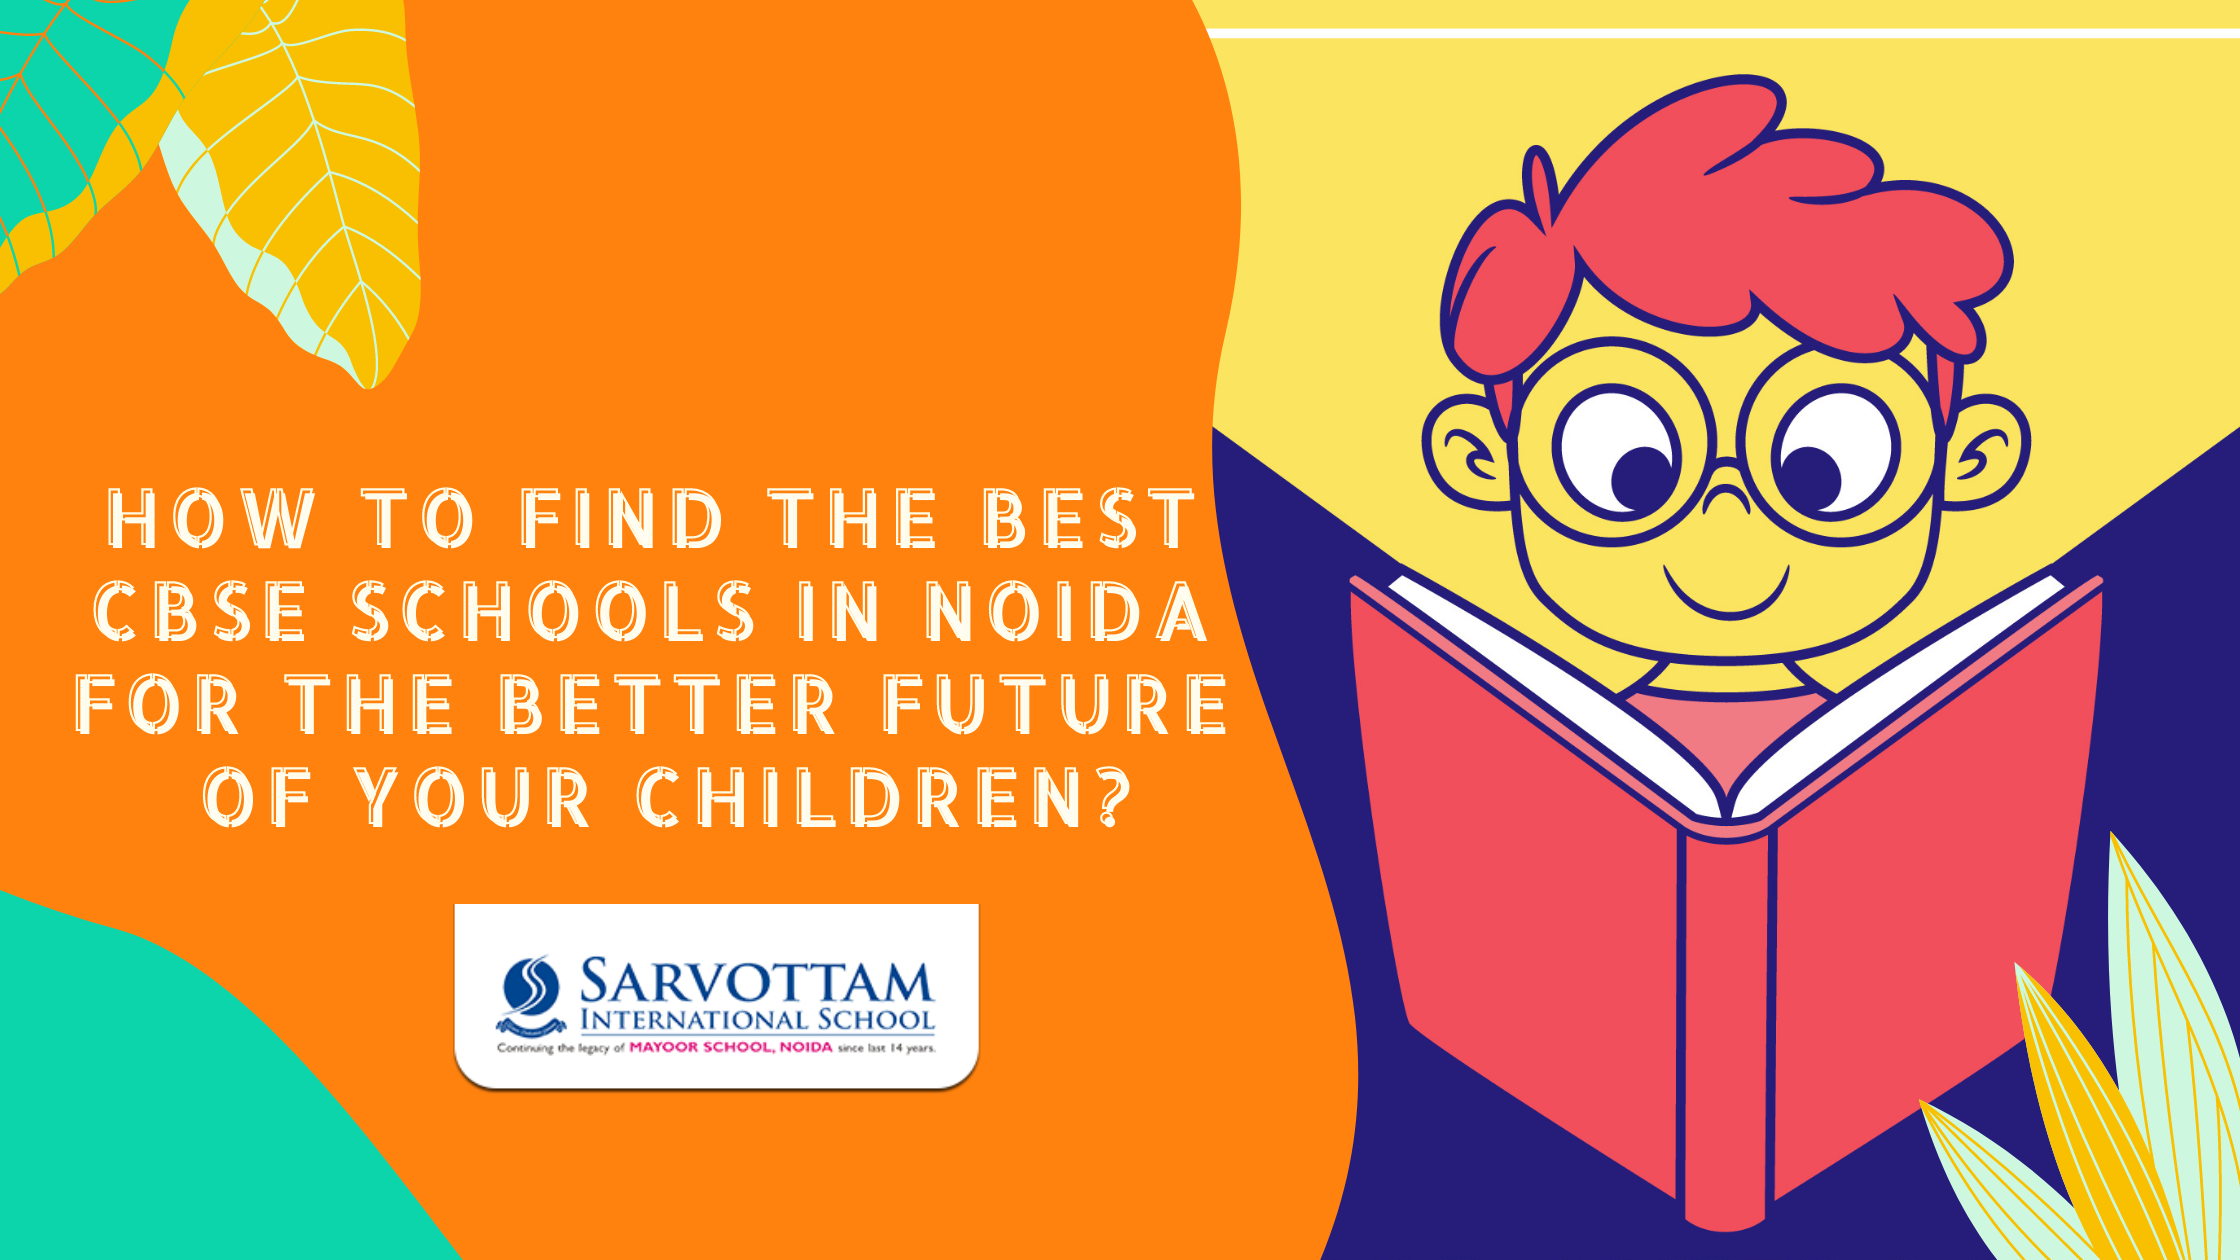 How To Find The Best CBSE Schools In Noida For The Better Future Of Your Children?